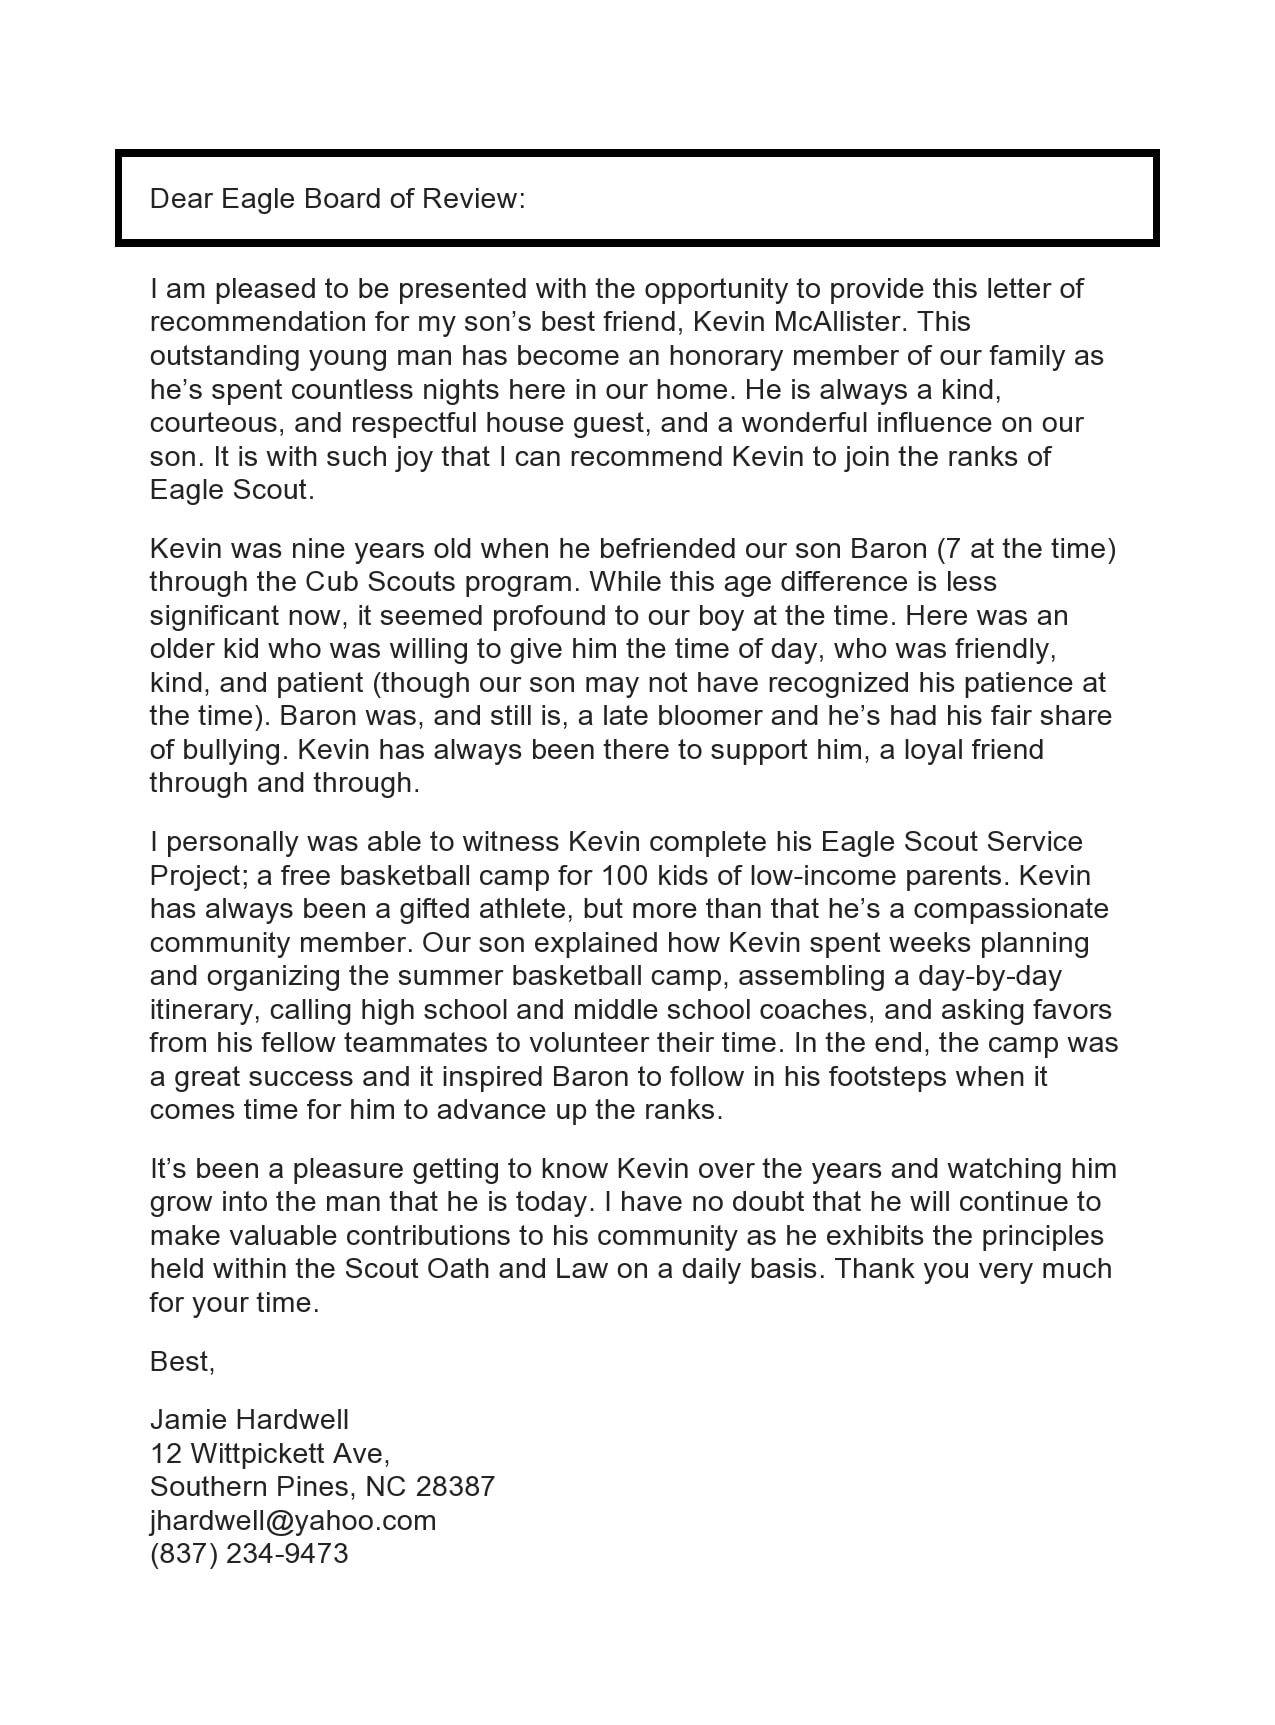 22 Eagle Scout Recommendation Letter Examples - TemplateArchive With Regard To Letter Of Recommendation For Eagle Scout Template